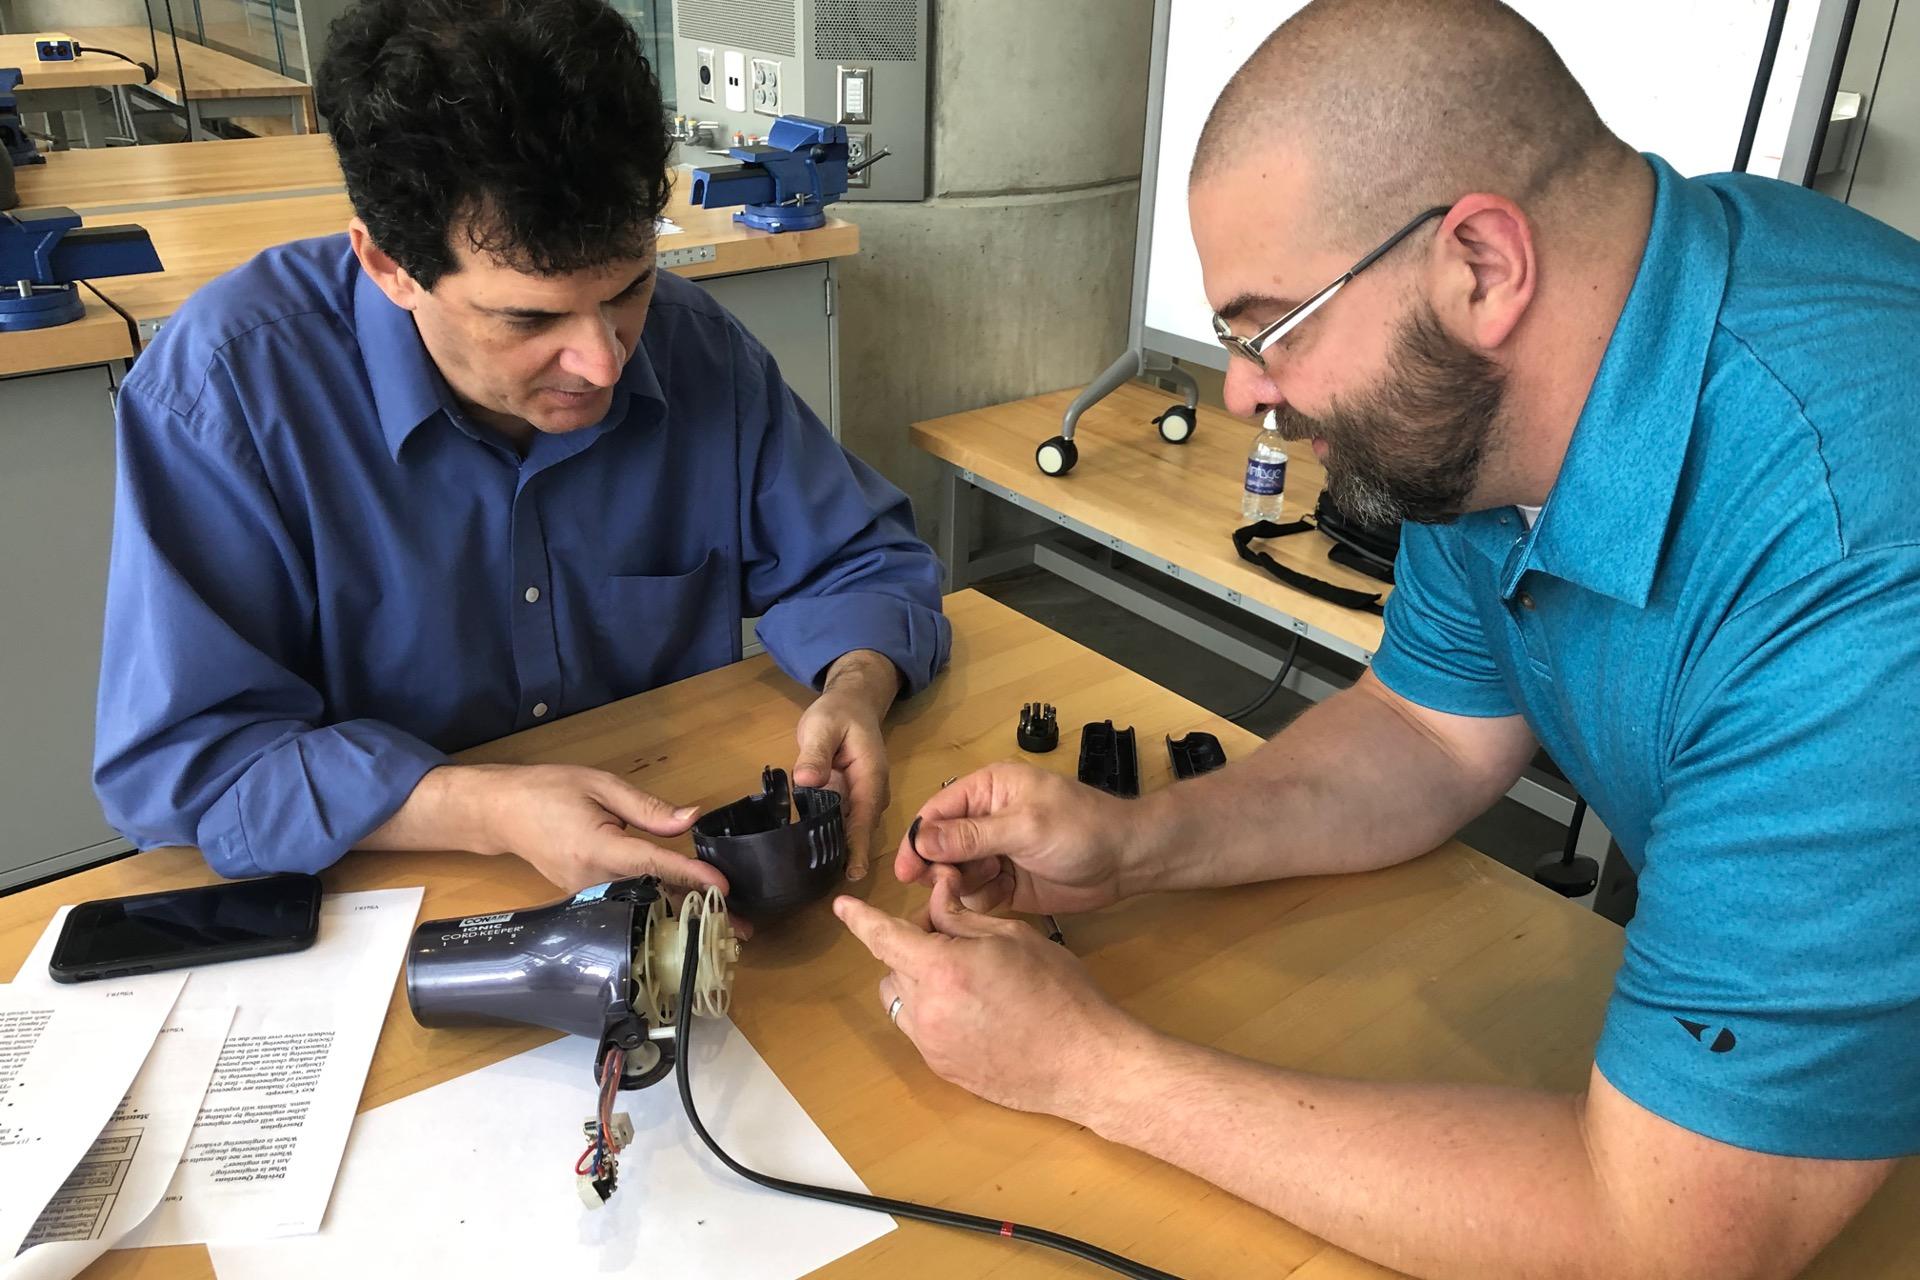 Two teachers modifying components of a hair blower as part of a project in a school laboratory.